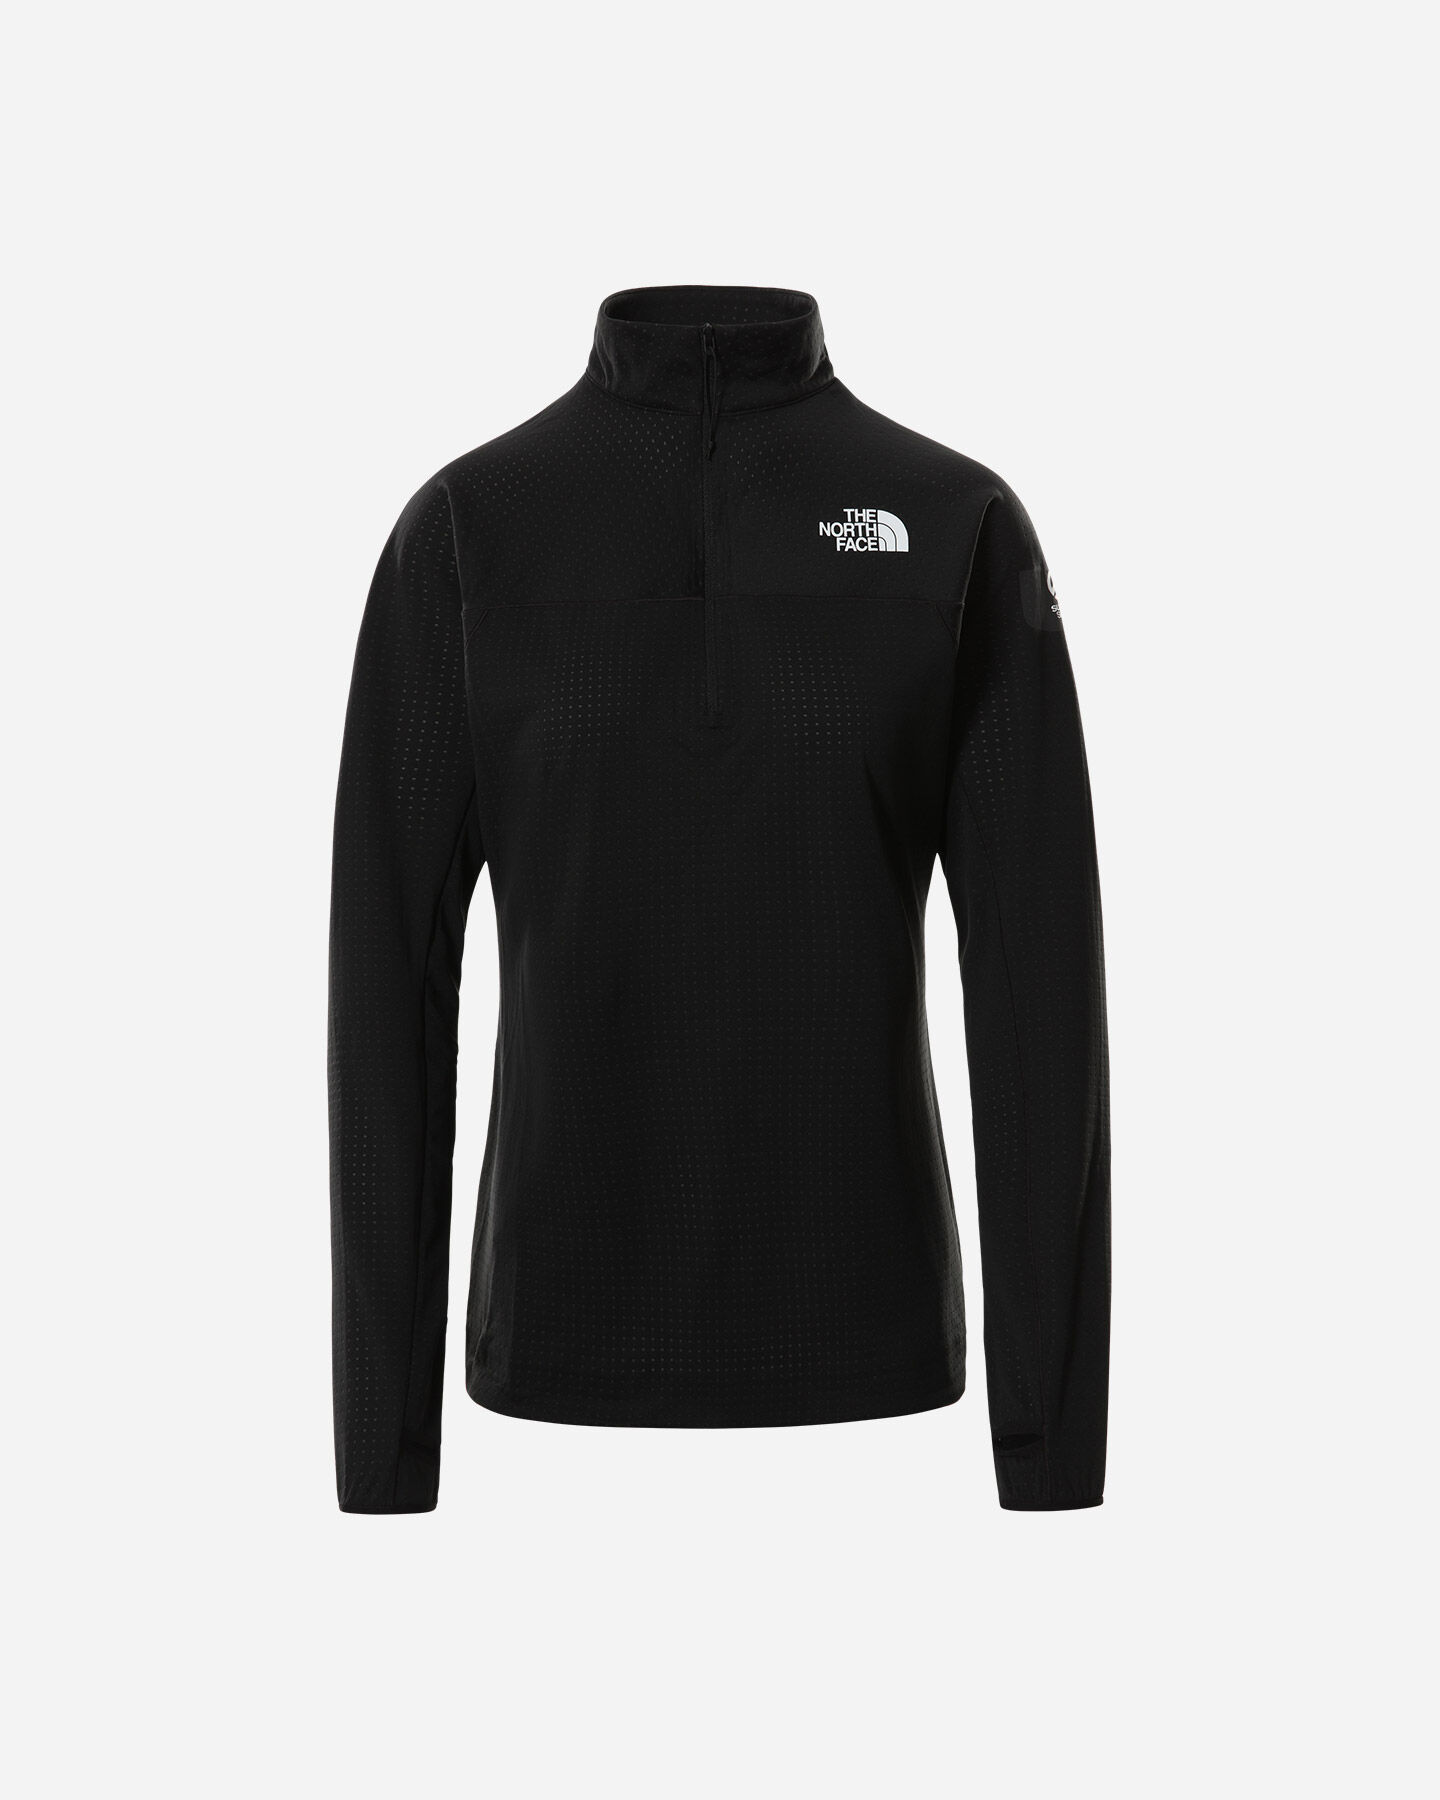  Pile THE NORTH FACE SUMMIT DOT  W S5243178|JK3|XS scatto 0